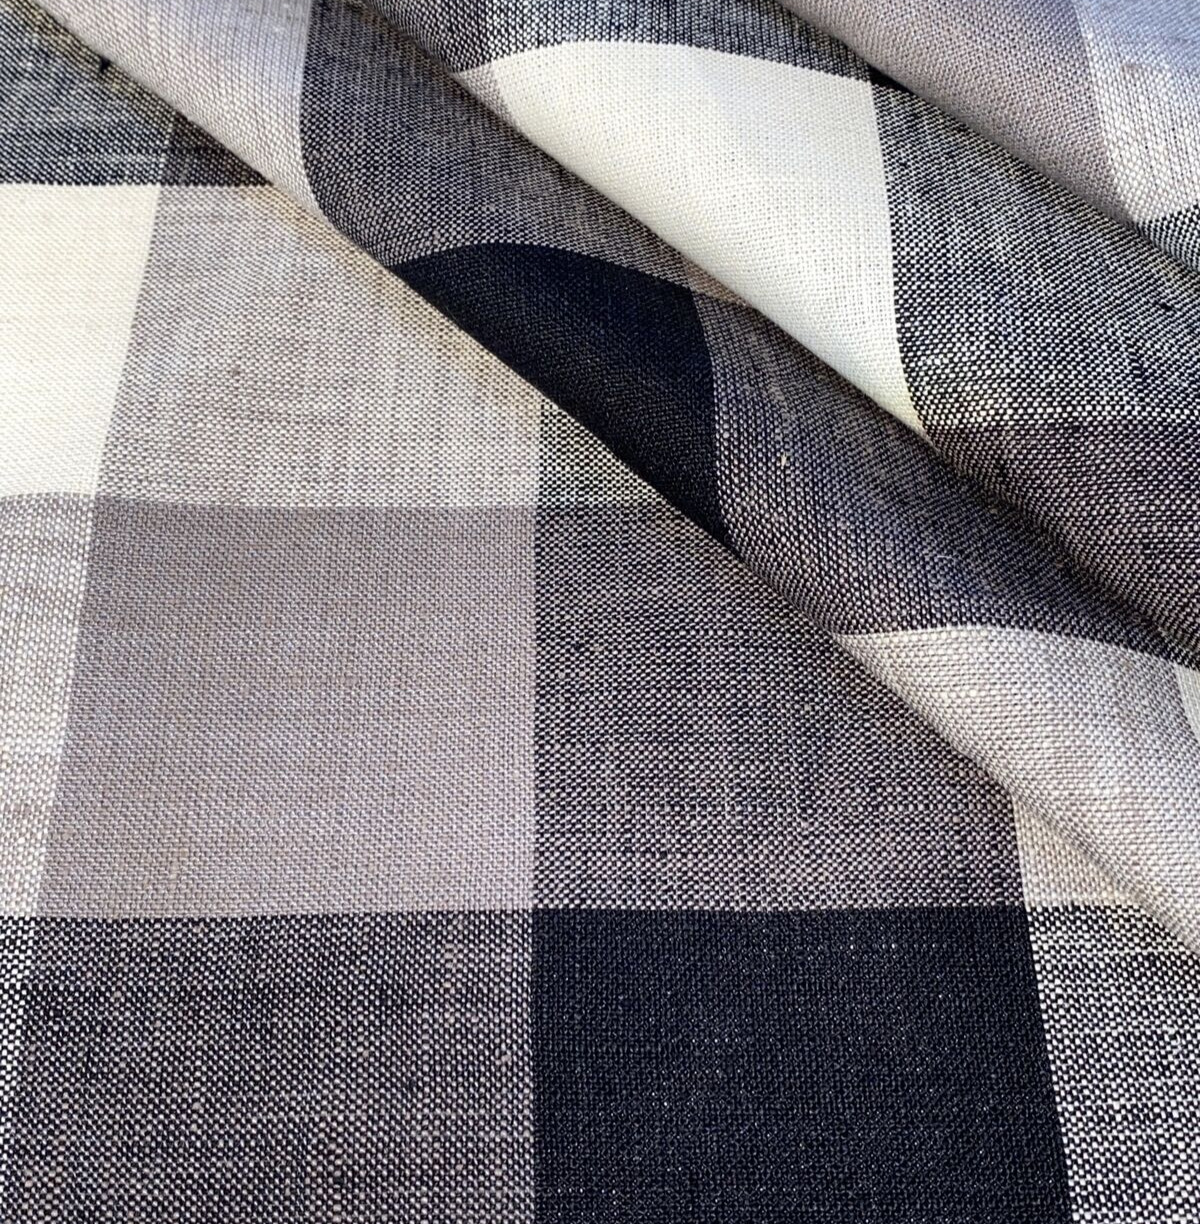 Checkered Black And White Linen  Fabric By The Yard